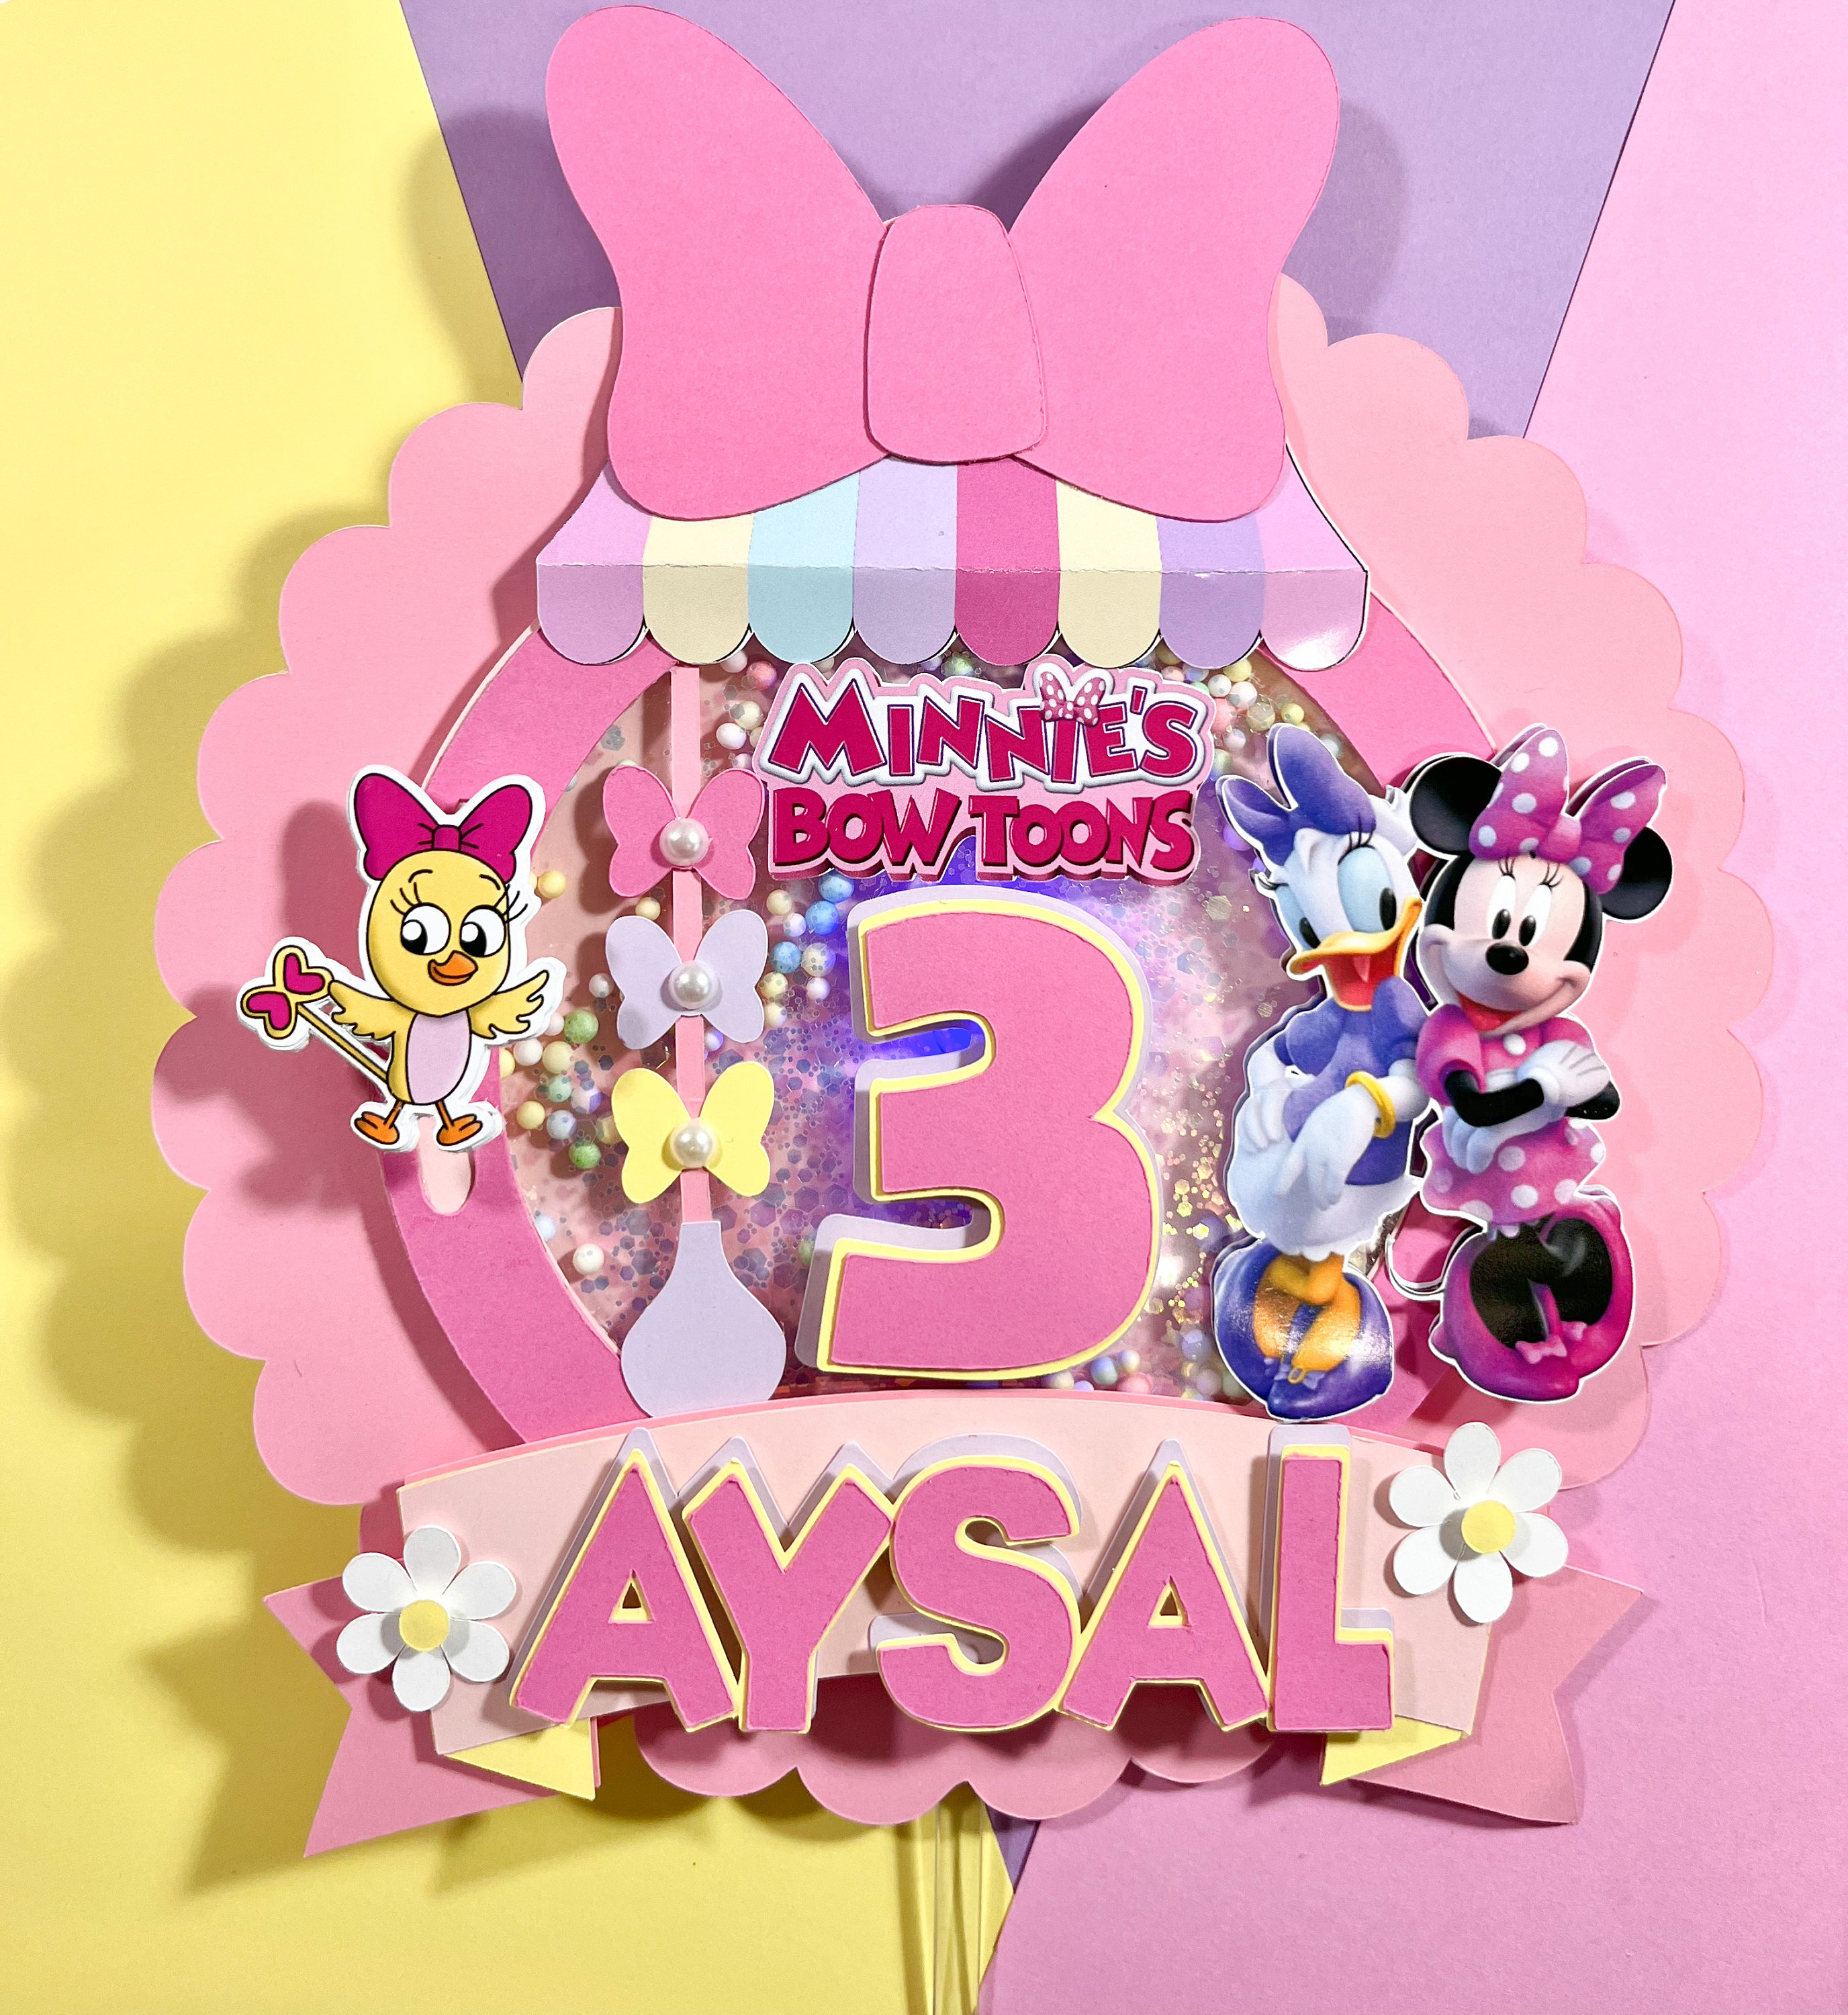 All About That Bow Minnie Themed Disney Vacation Countdown Tracker Pla –  Adorably Amy Designs